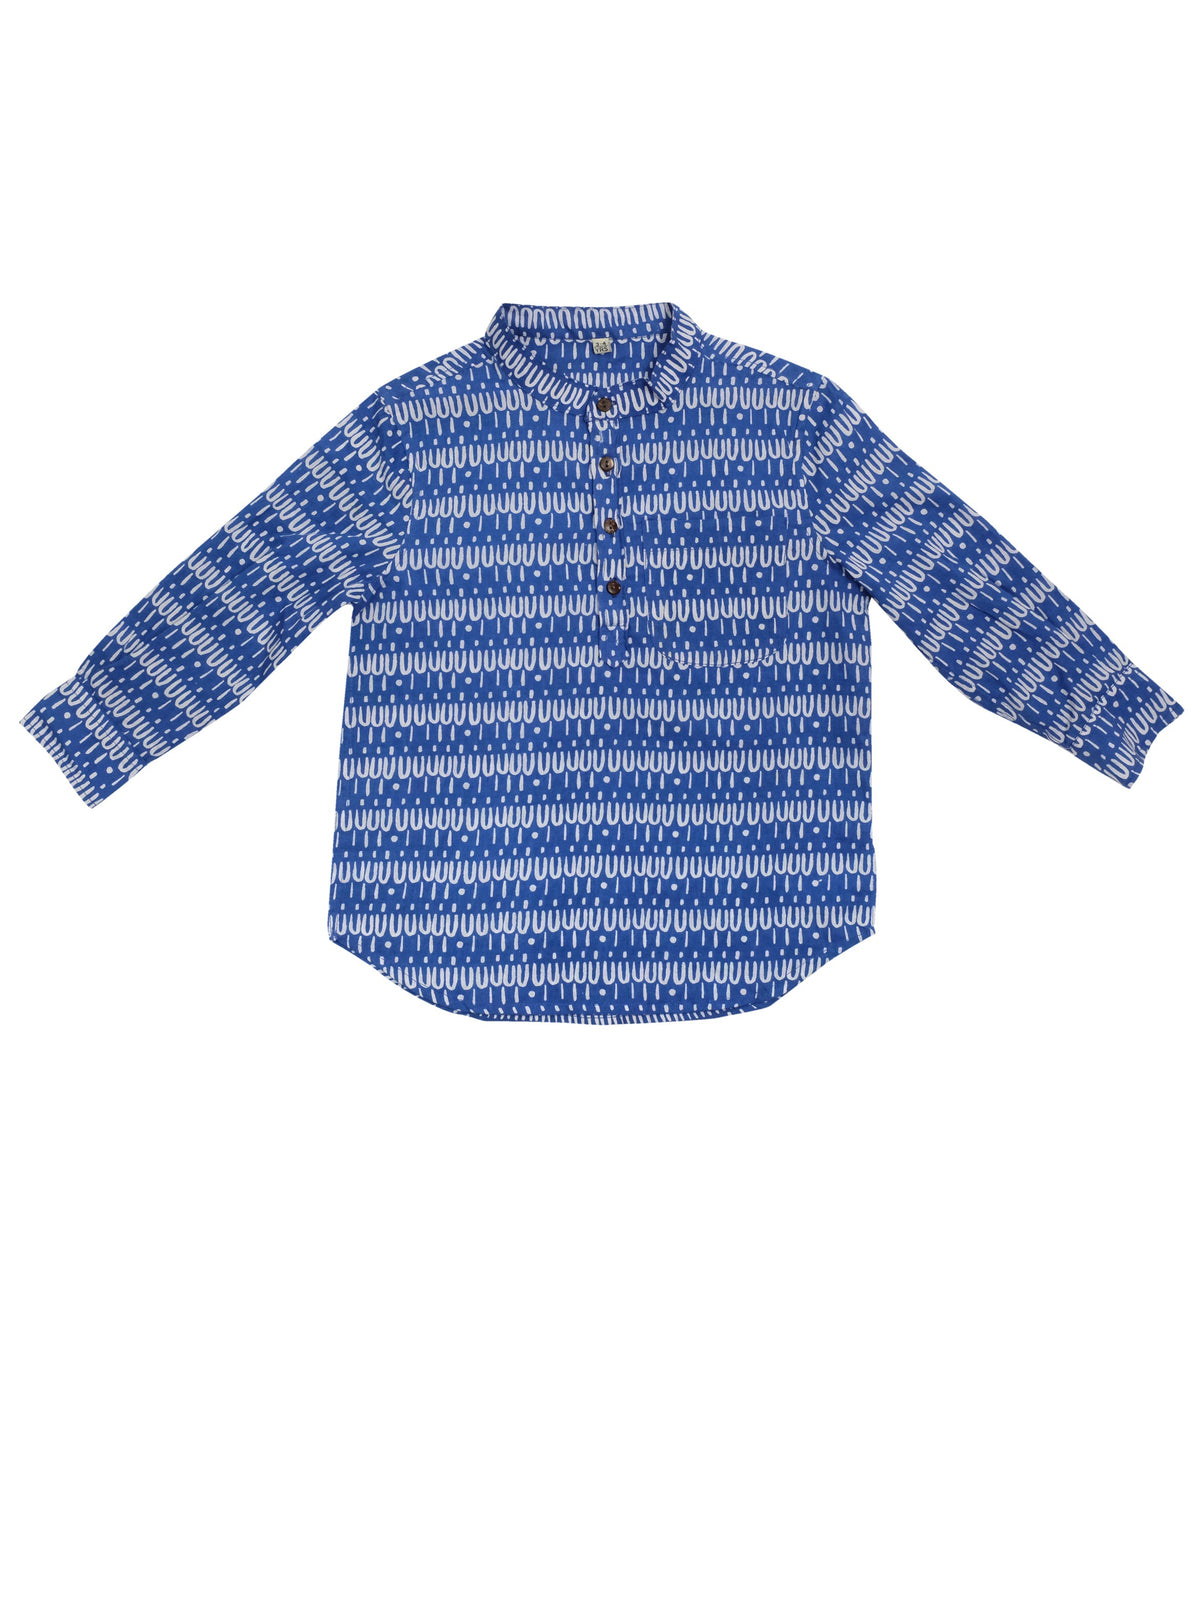 Indian collar kids shirt in Scallop on blue organic light cotton-Humphries and Begg